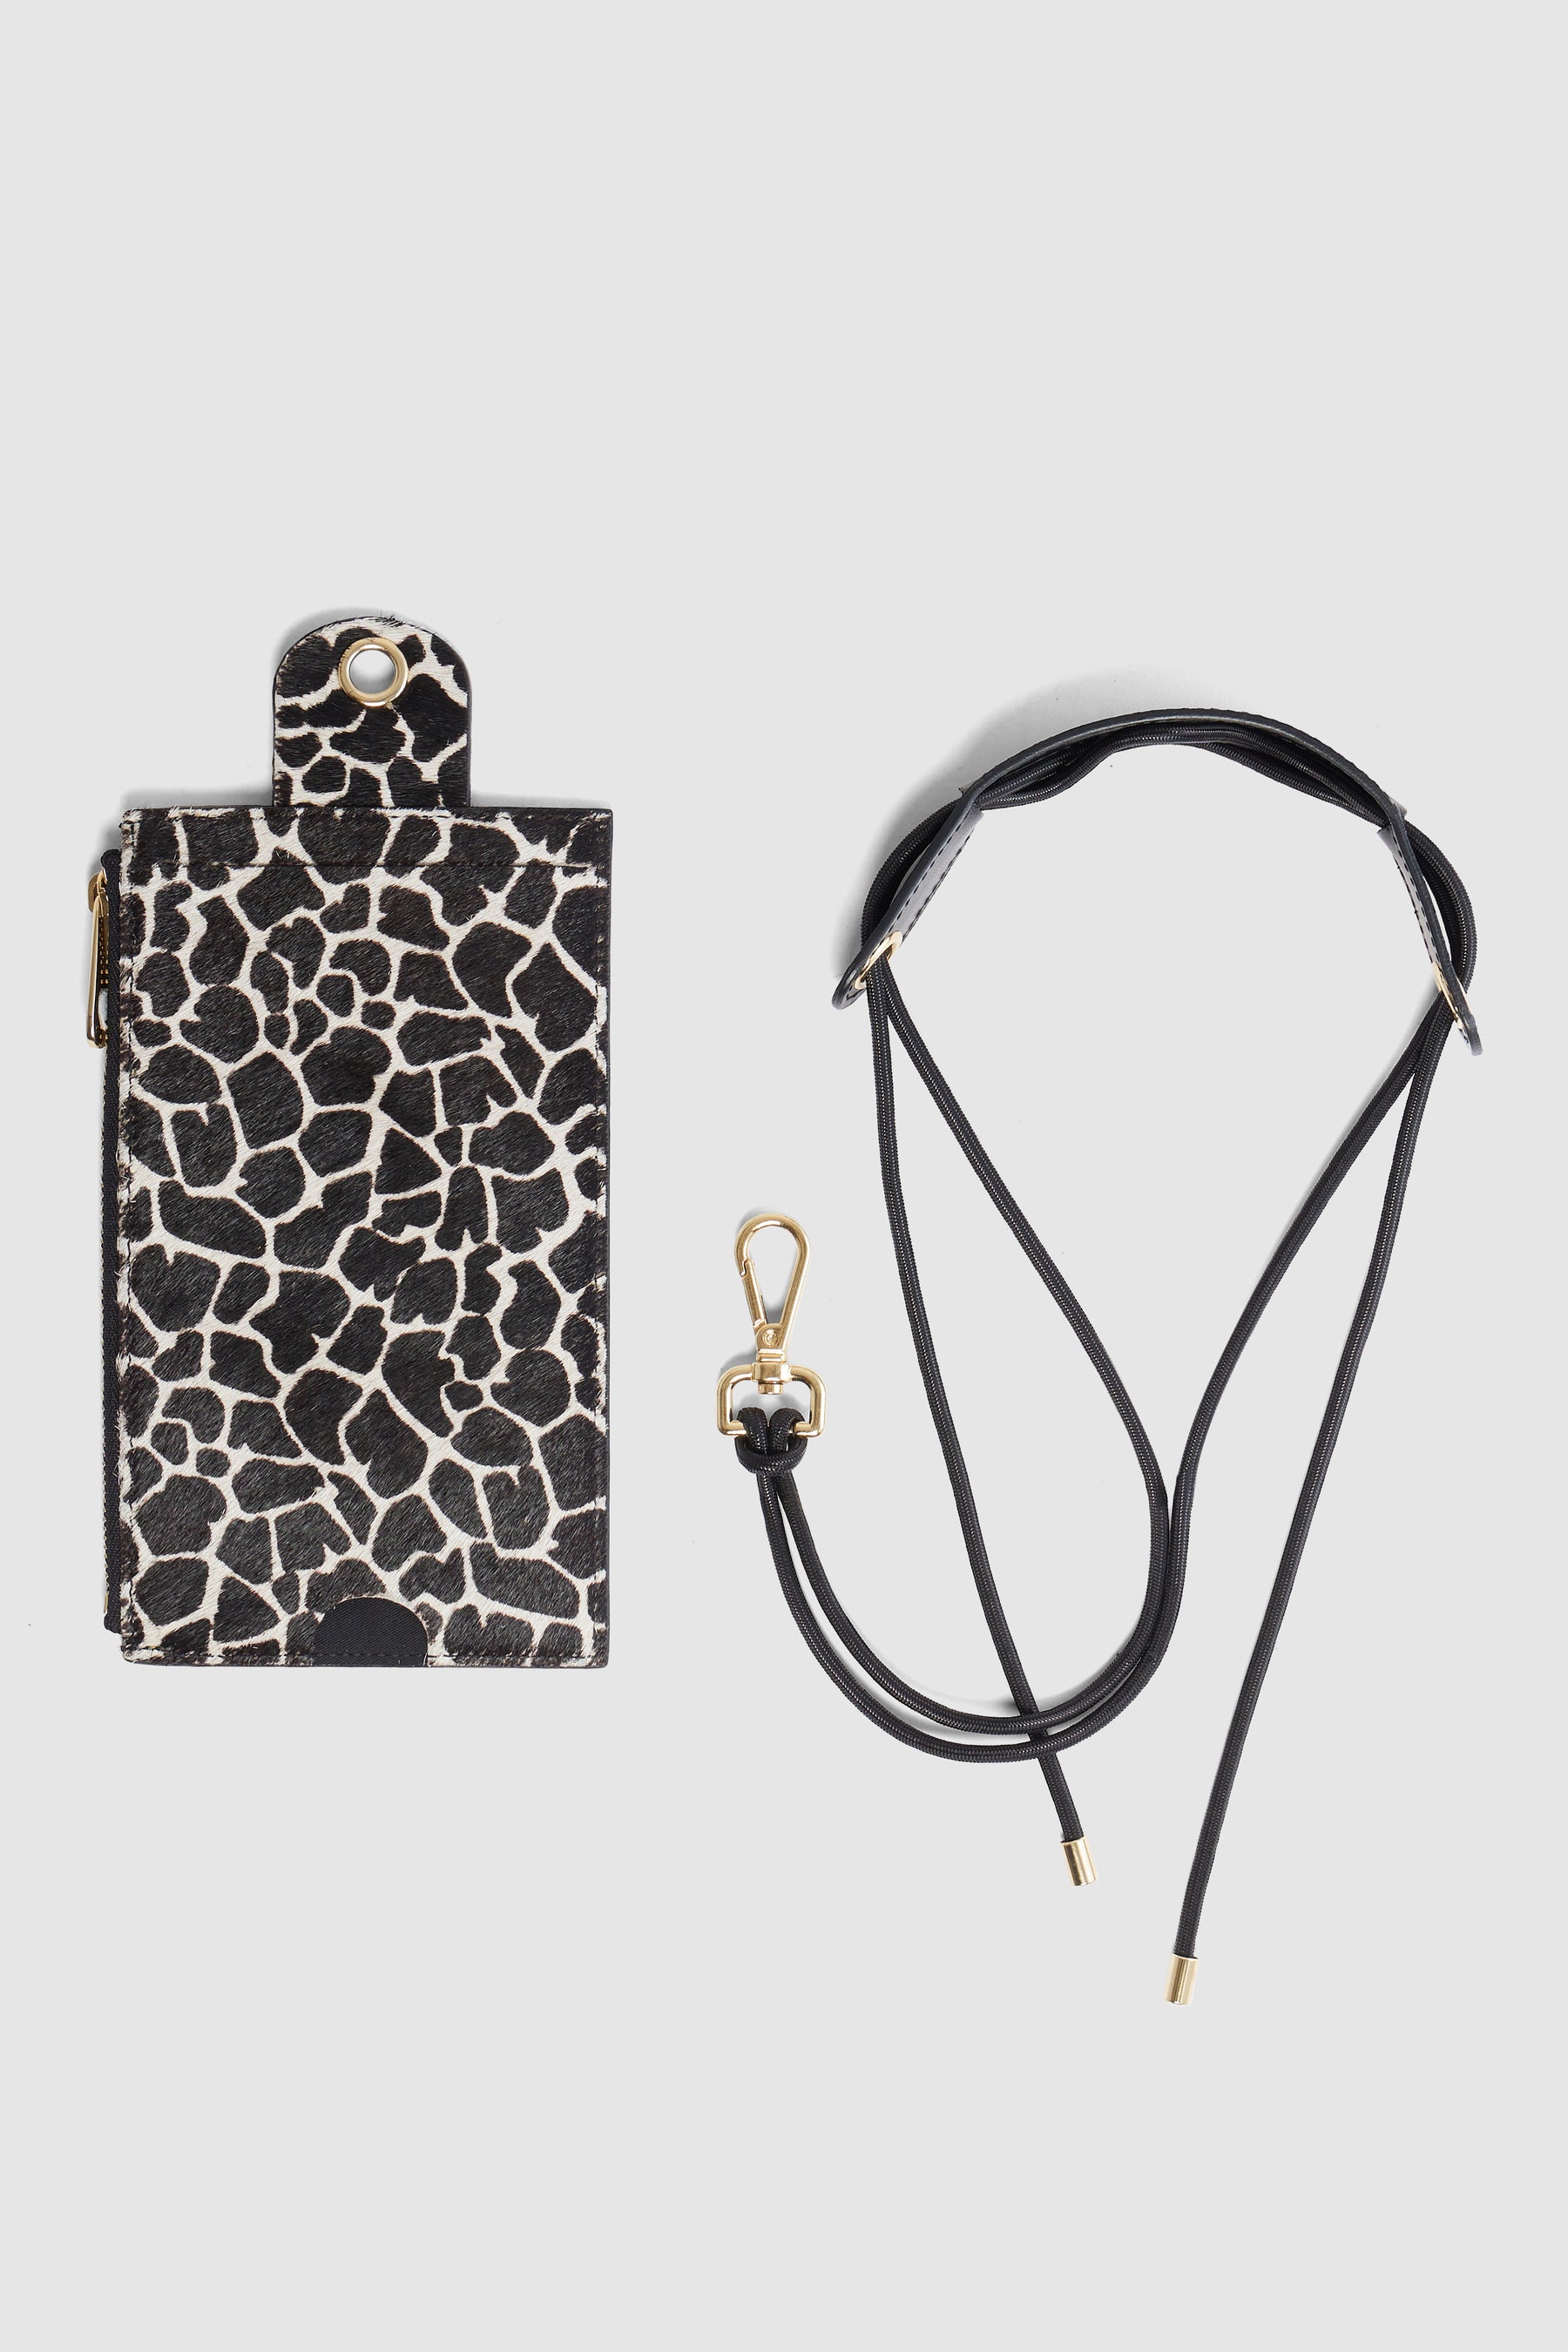 The Minis - Large neck wallet in white Giraffe printed leather